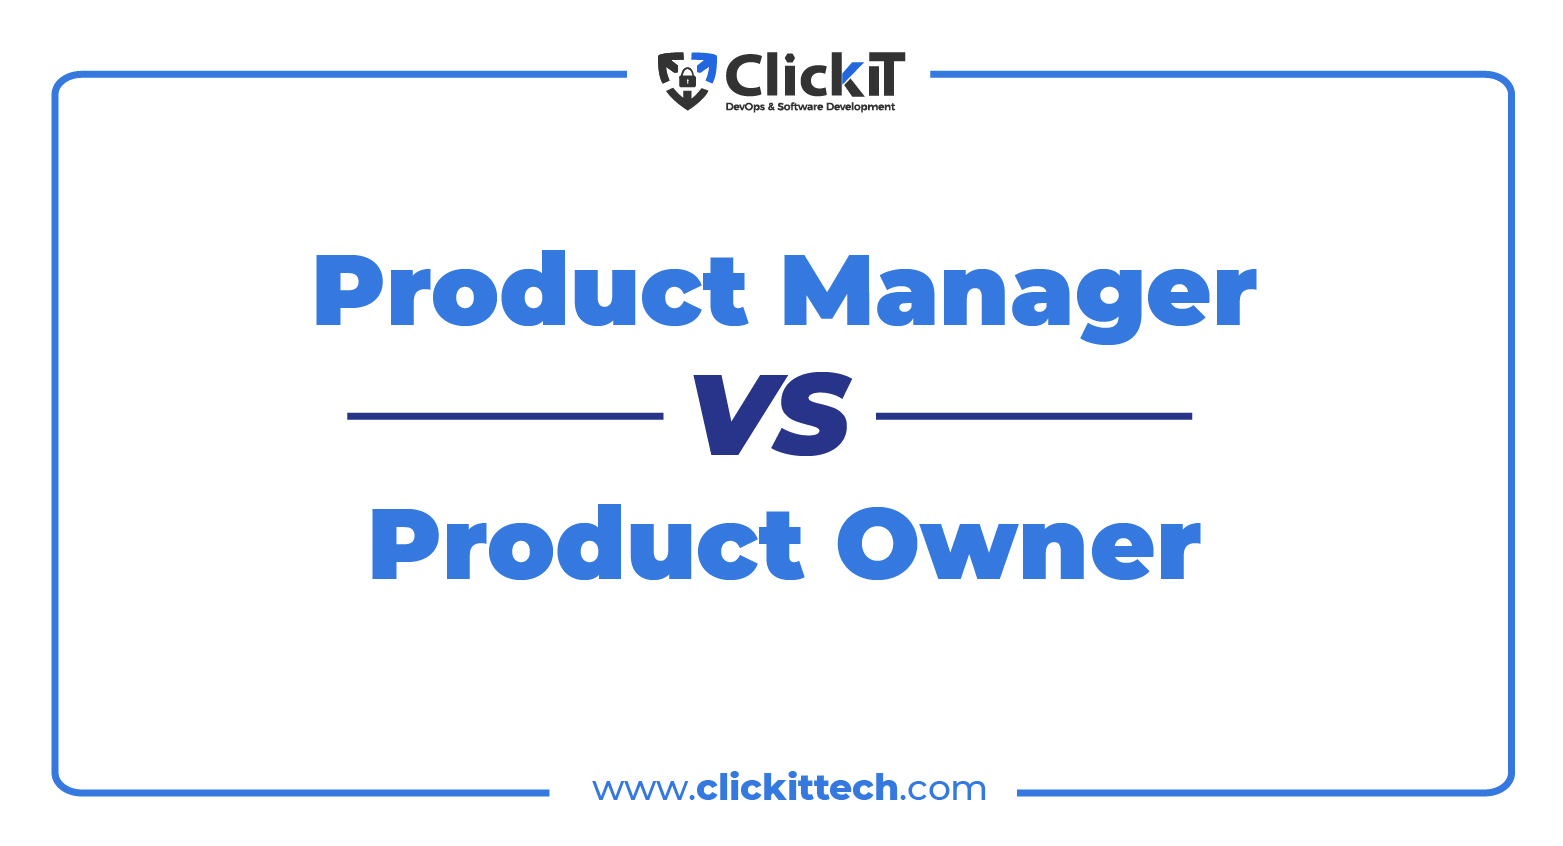 Product Manager vs Product Owner: Who Does What?